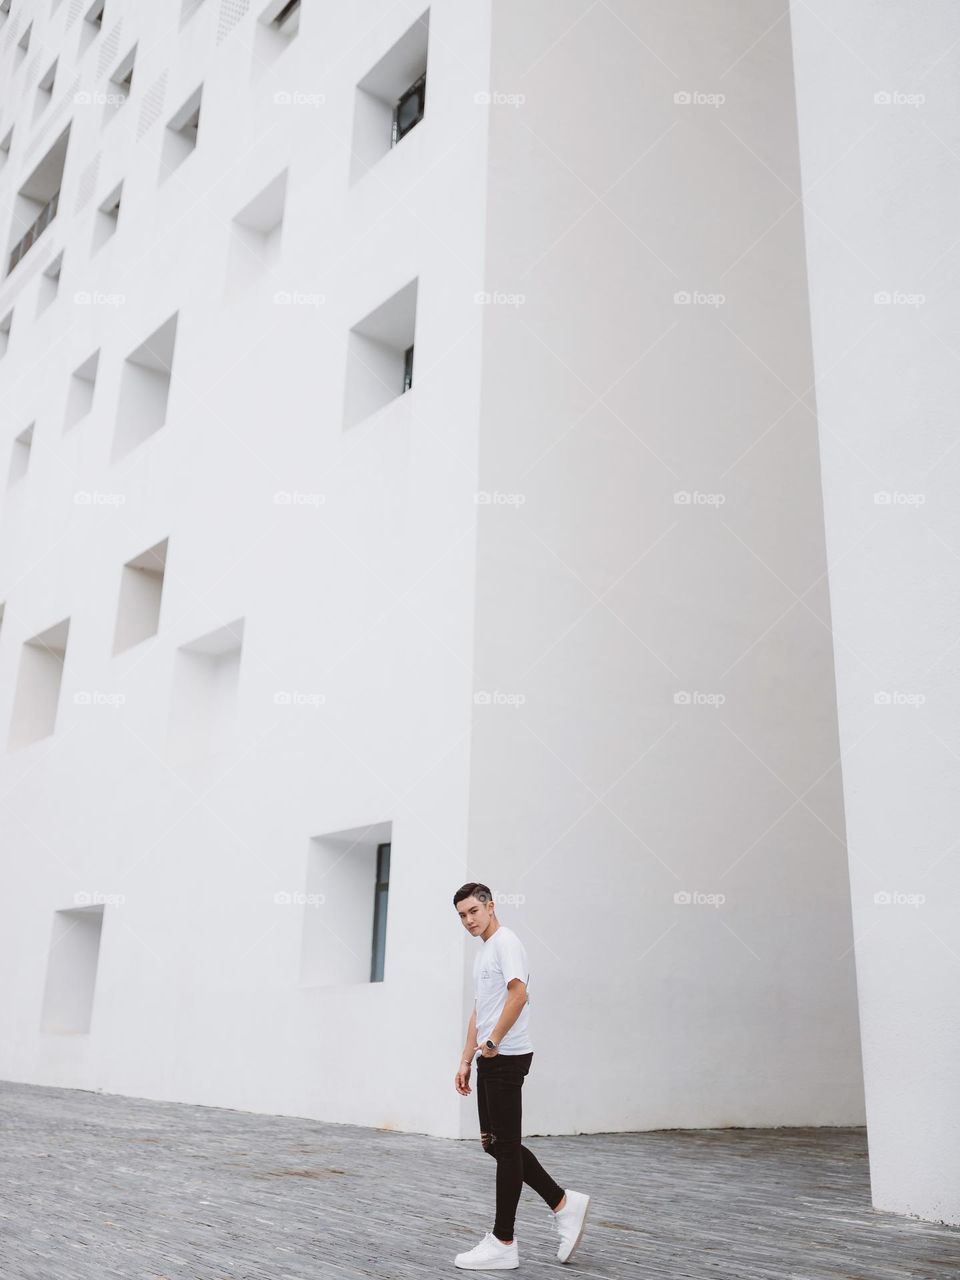 A man with white tee is walking in front of an artistic, geometric, white architecture